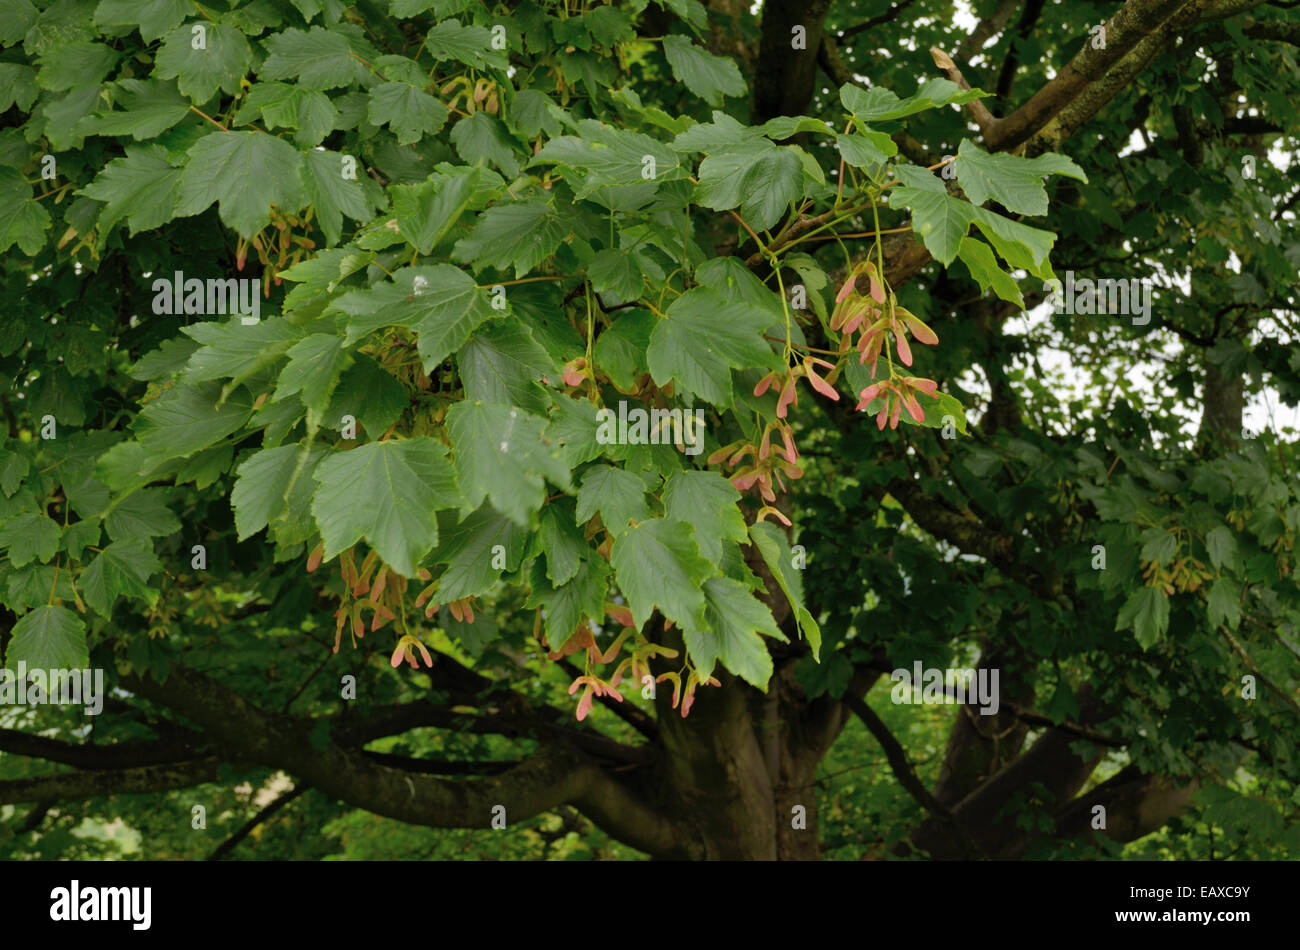 Sycamore, Acer pseudoplatanus, young 'keys' Stock Photo